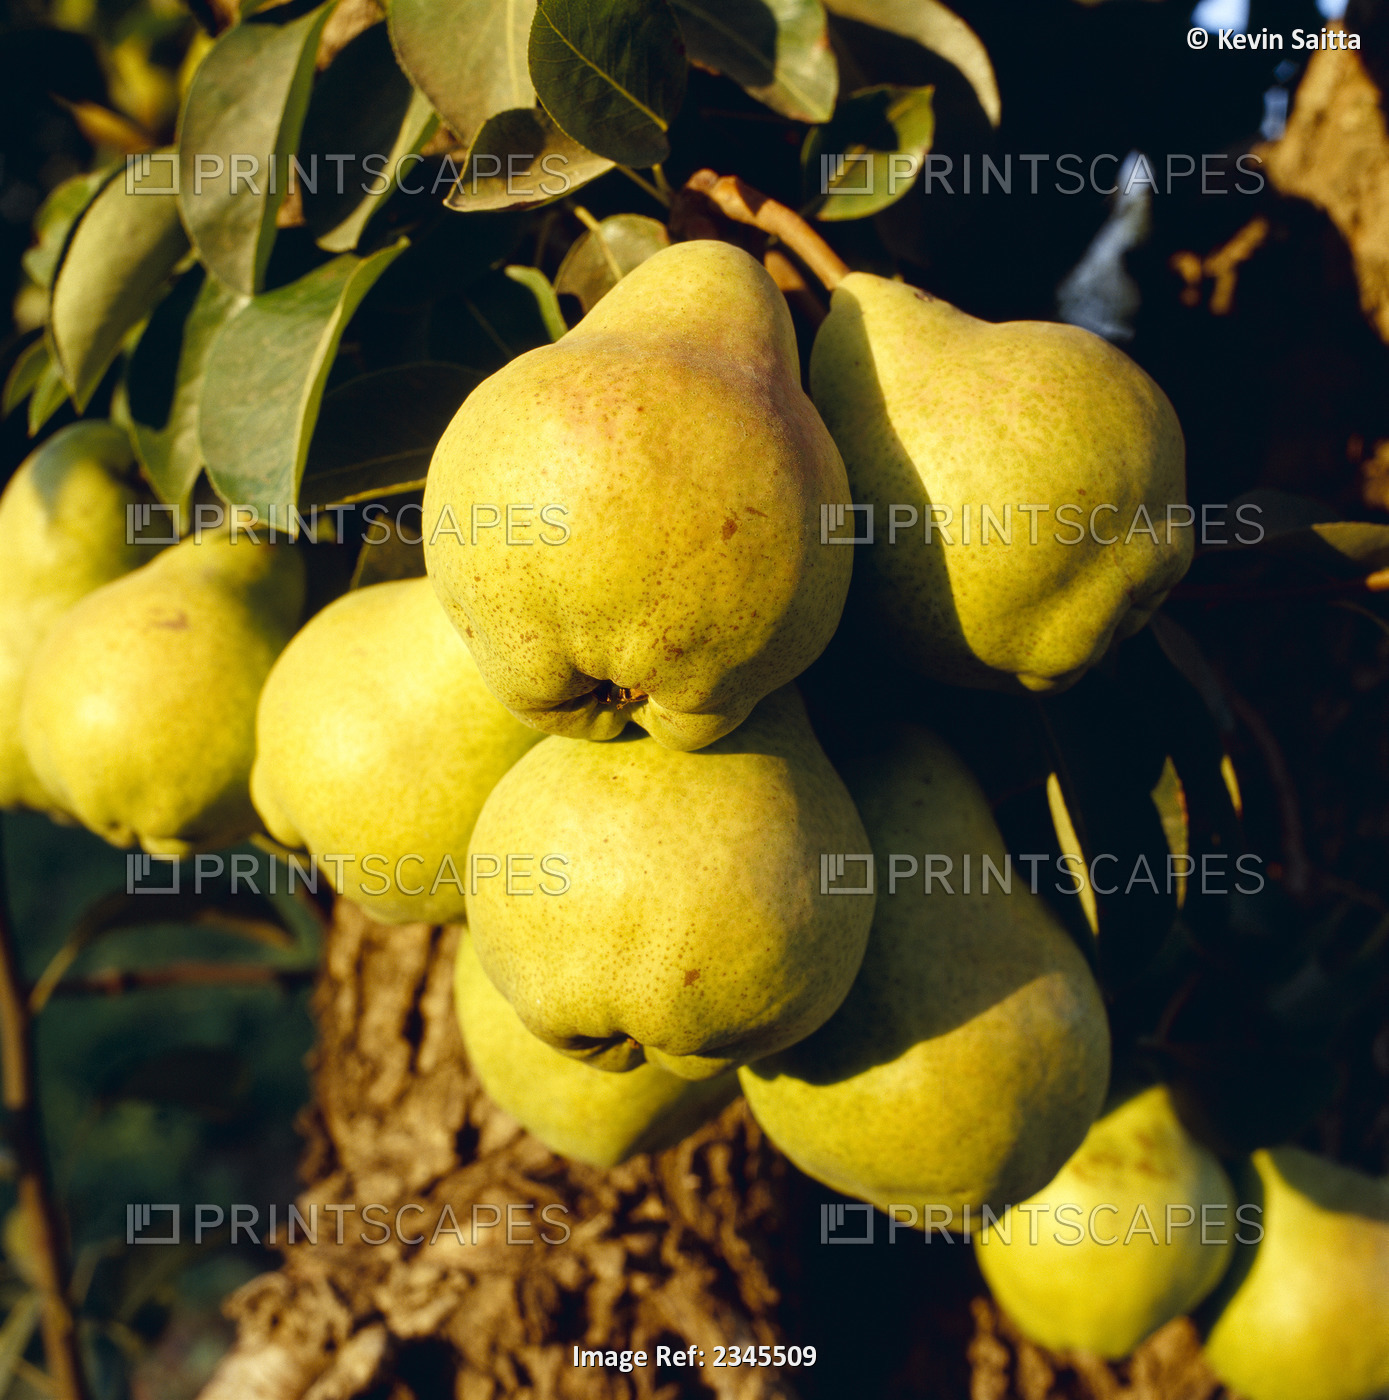 Agriculture - Mature Bartlett pears on the tree in late afternoon light / ...